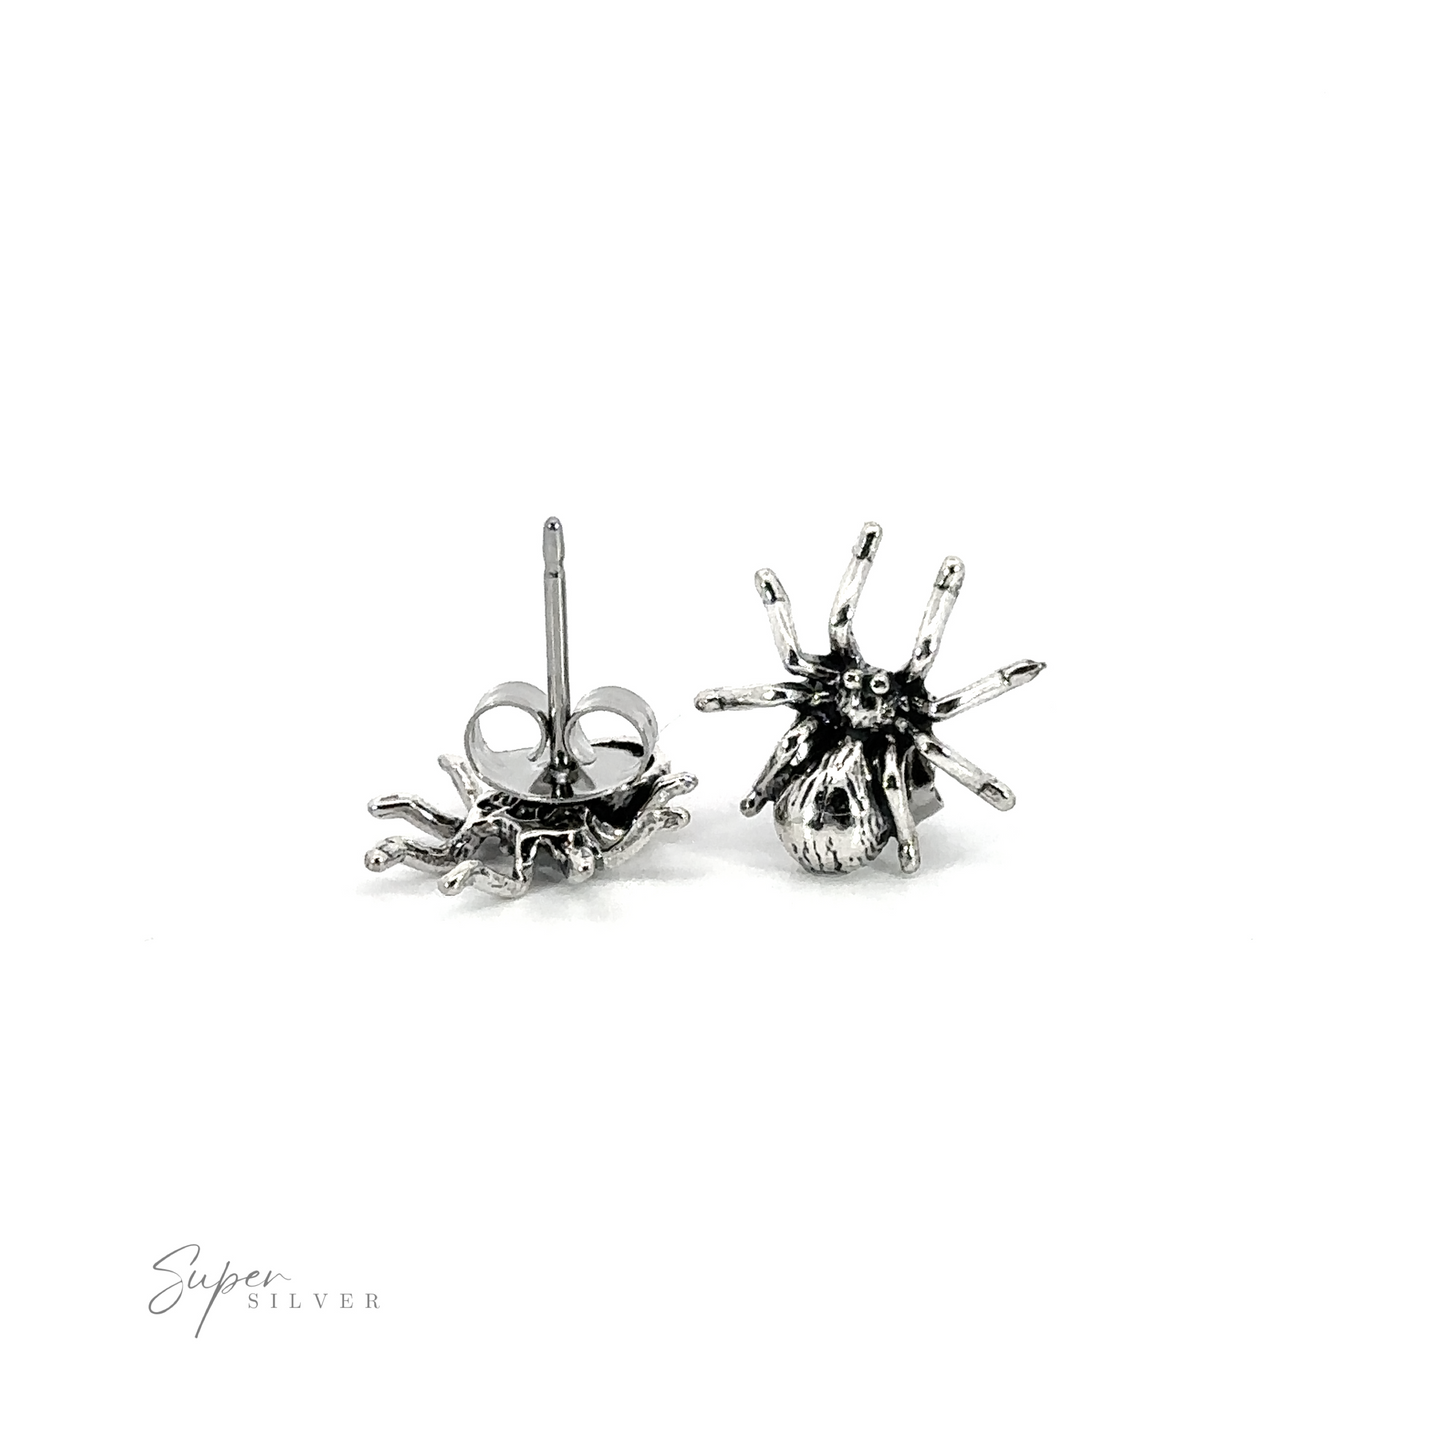 A pair of gothic Spider Studs on a white background, creating a stylish accessory.